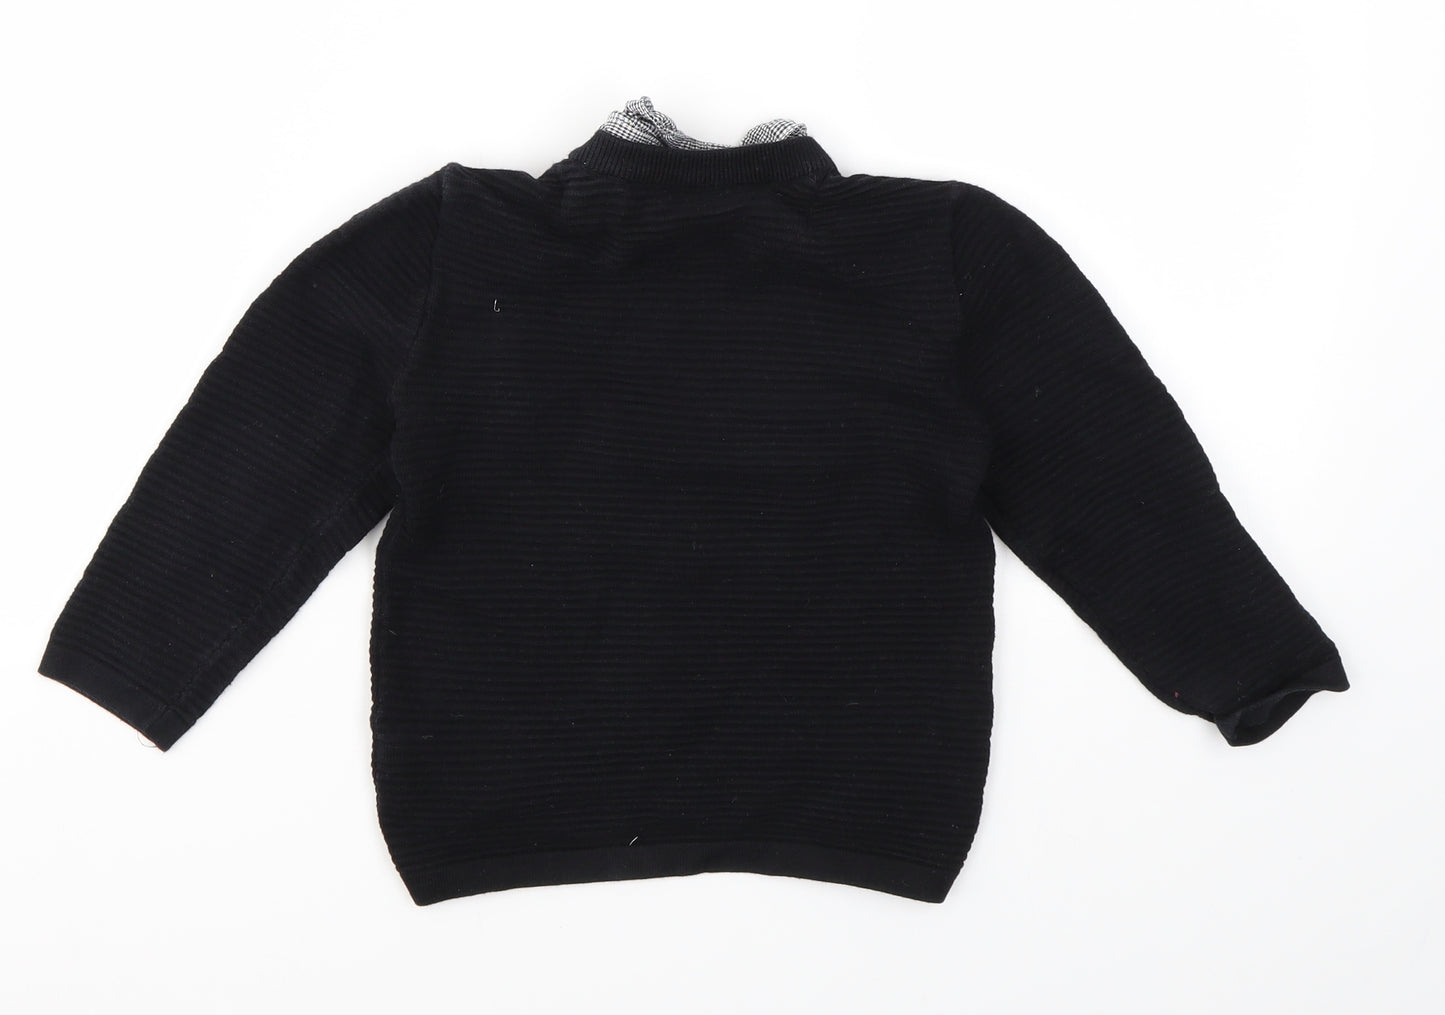 NEXT Boys Black   Pullover Jumper Size 3 Years